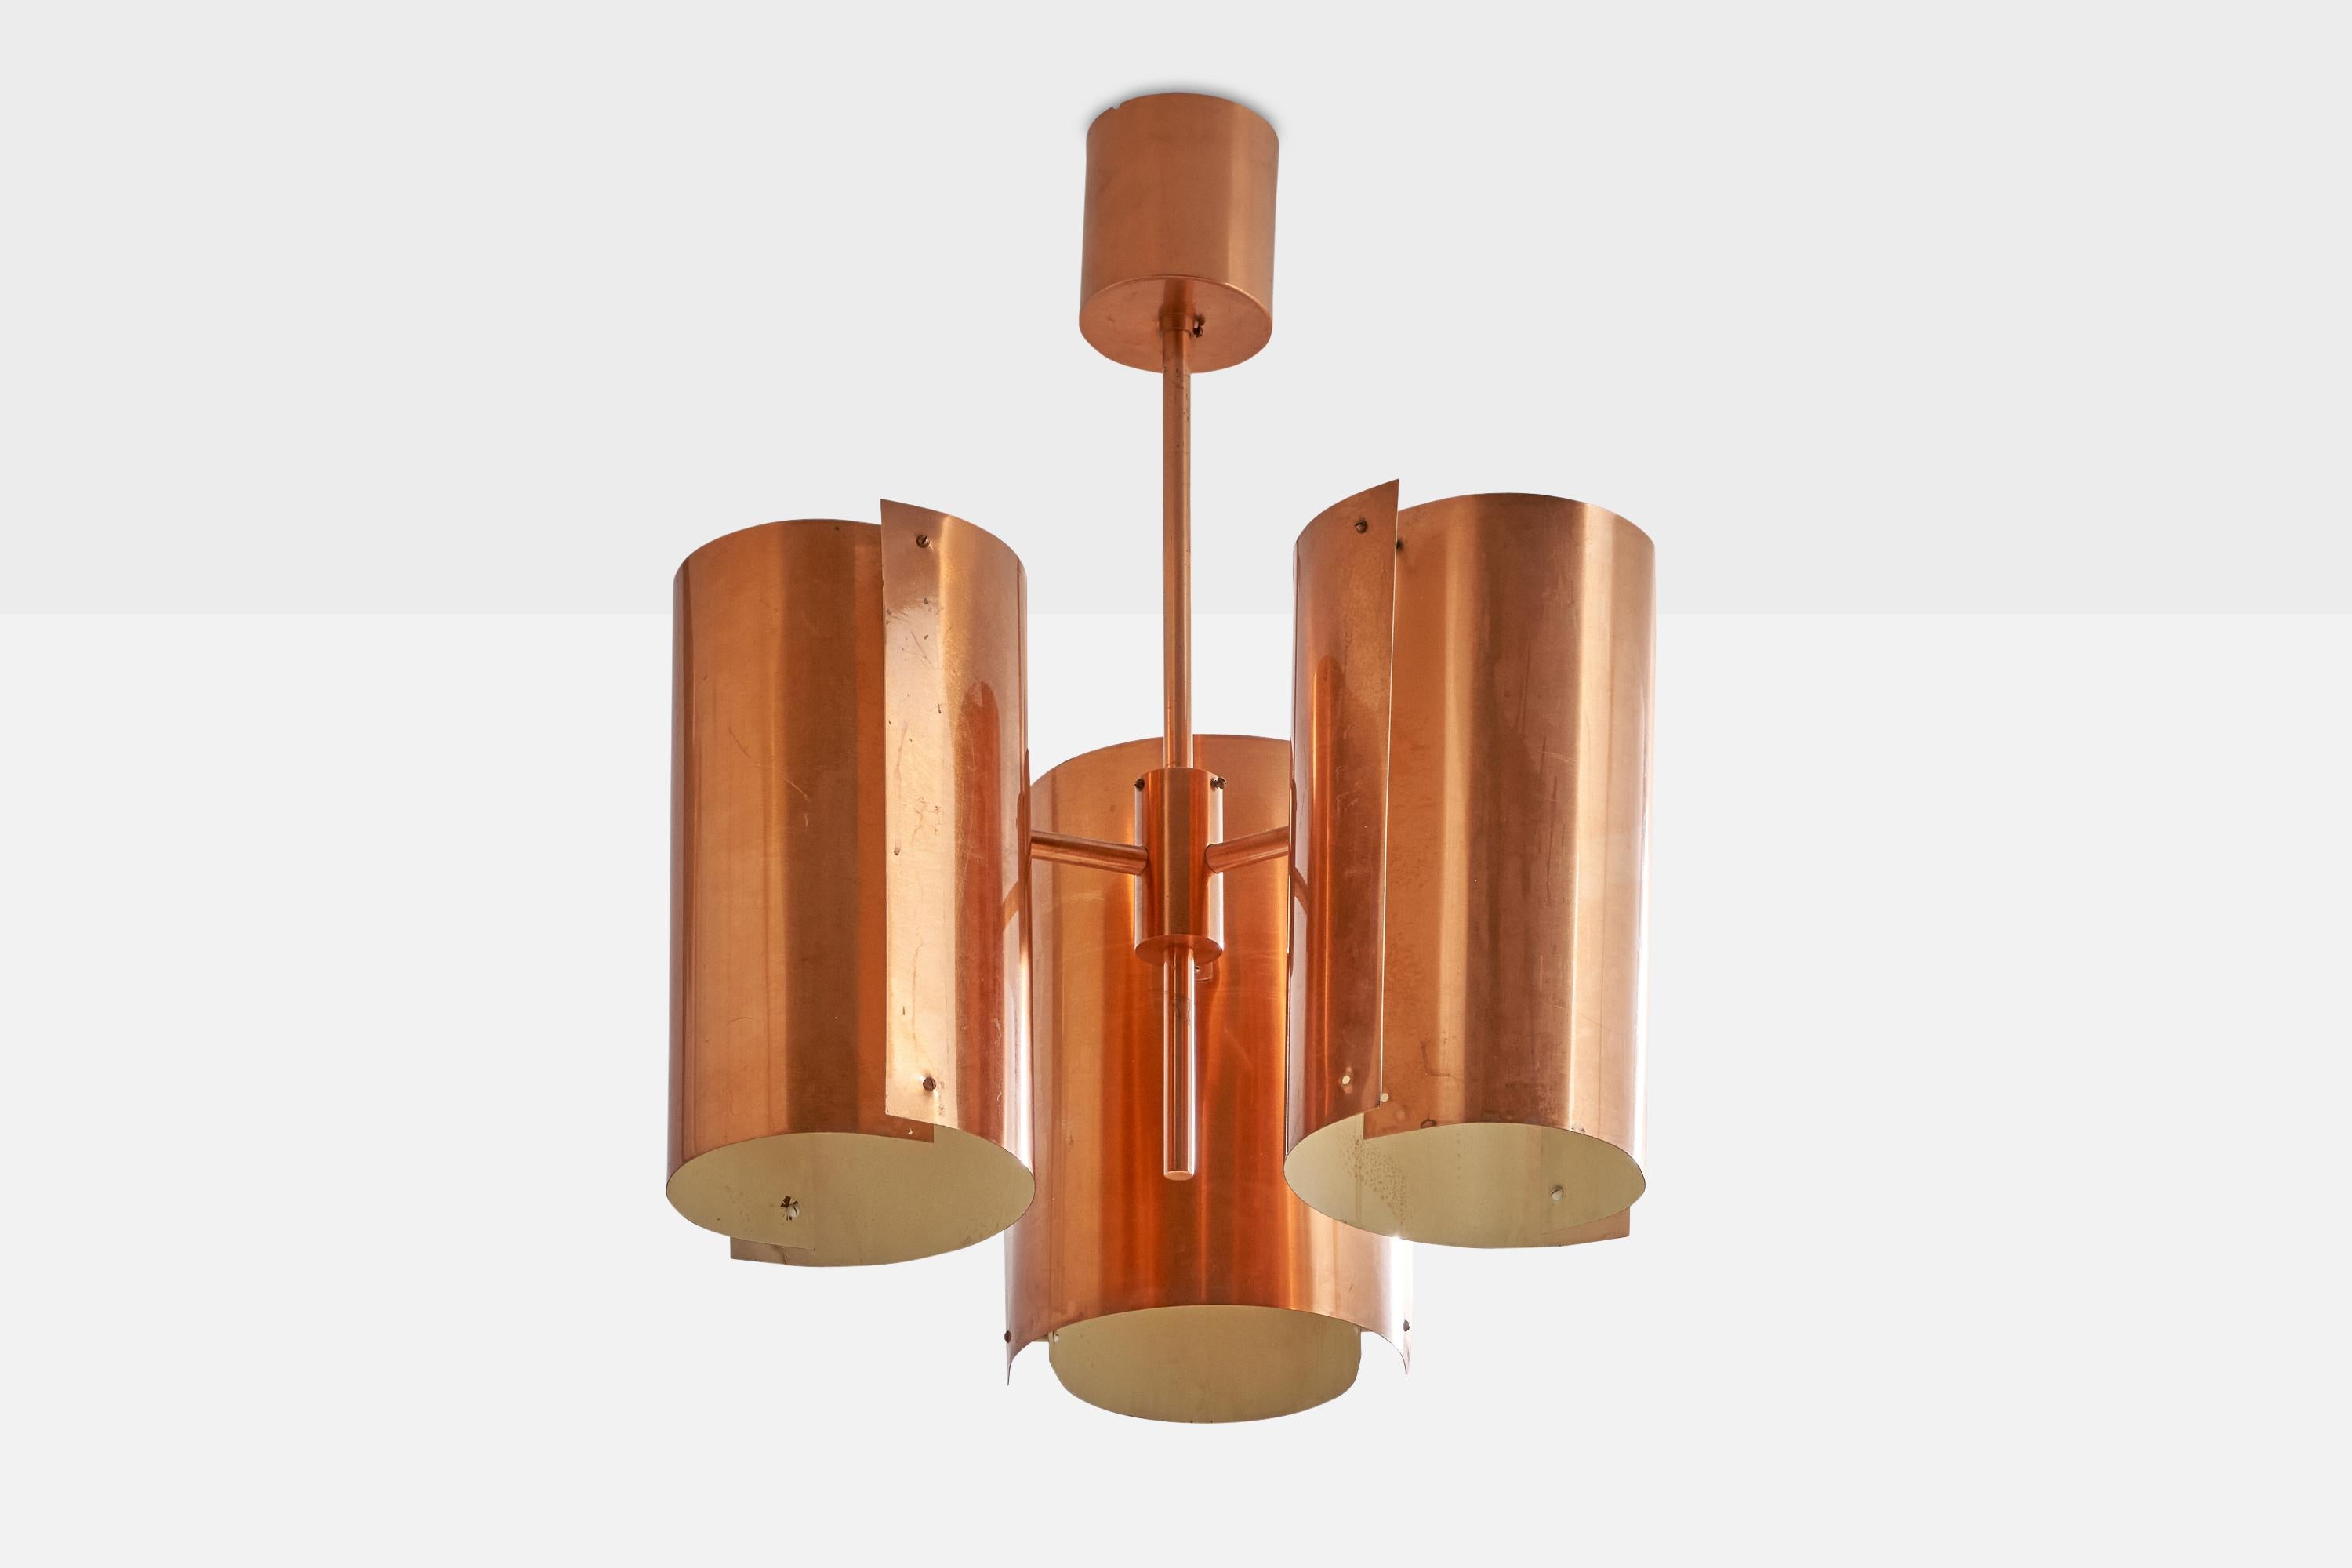 A three-armed copper chandelier designed and produced by Hans Agne Jakobsson, Sweden, 1960s.

Dimensions of canopy (inches): 4.75” H x 4.4” Diameter
Socket takes standard E-26 bulbs. 4 sockets.There is no maximum wattage stated on the fixture. All